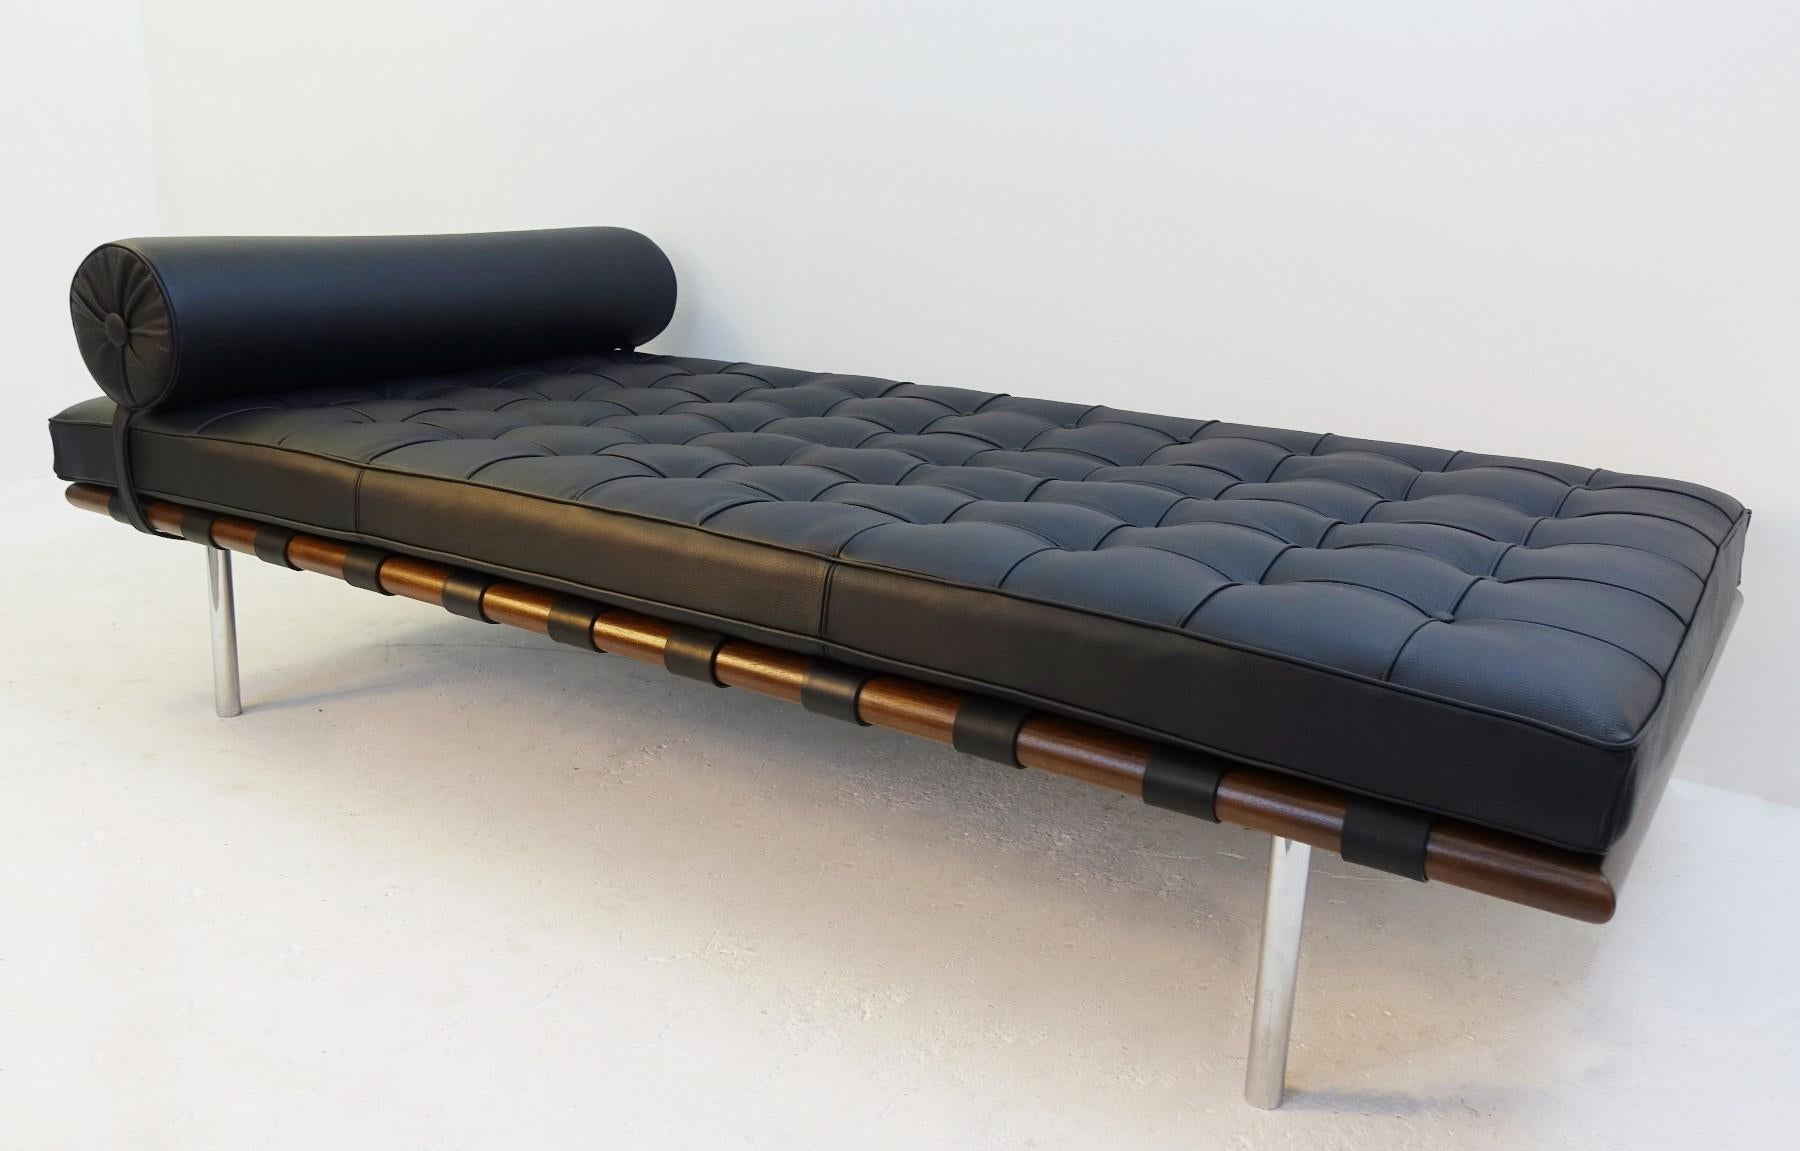 'Barcelona' daybed by Mies van der Rohe for Knoll.